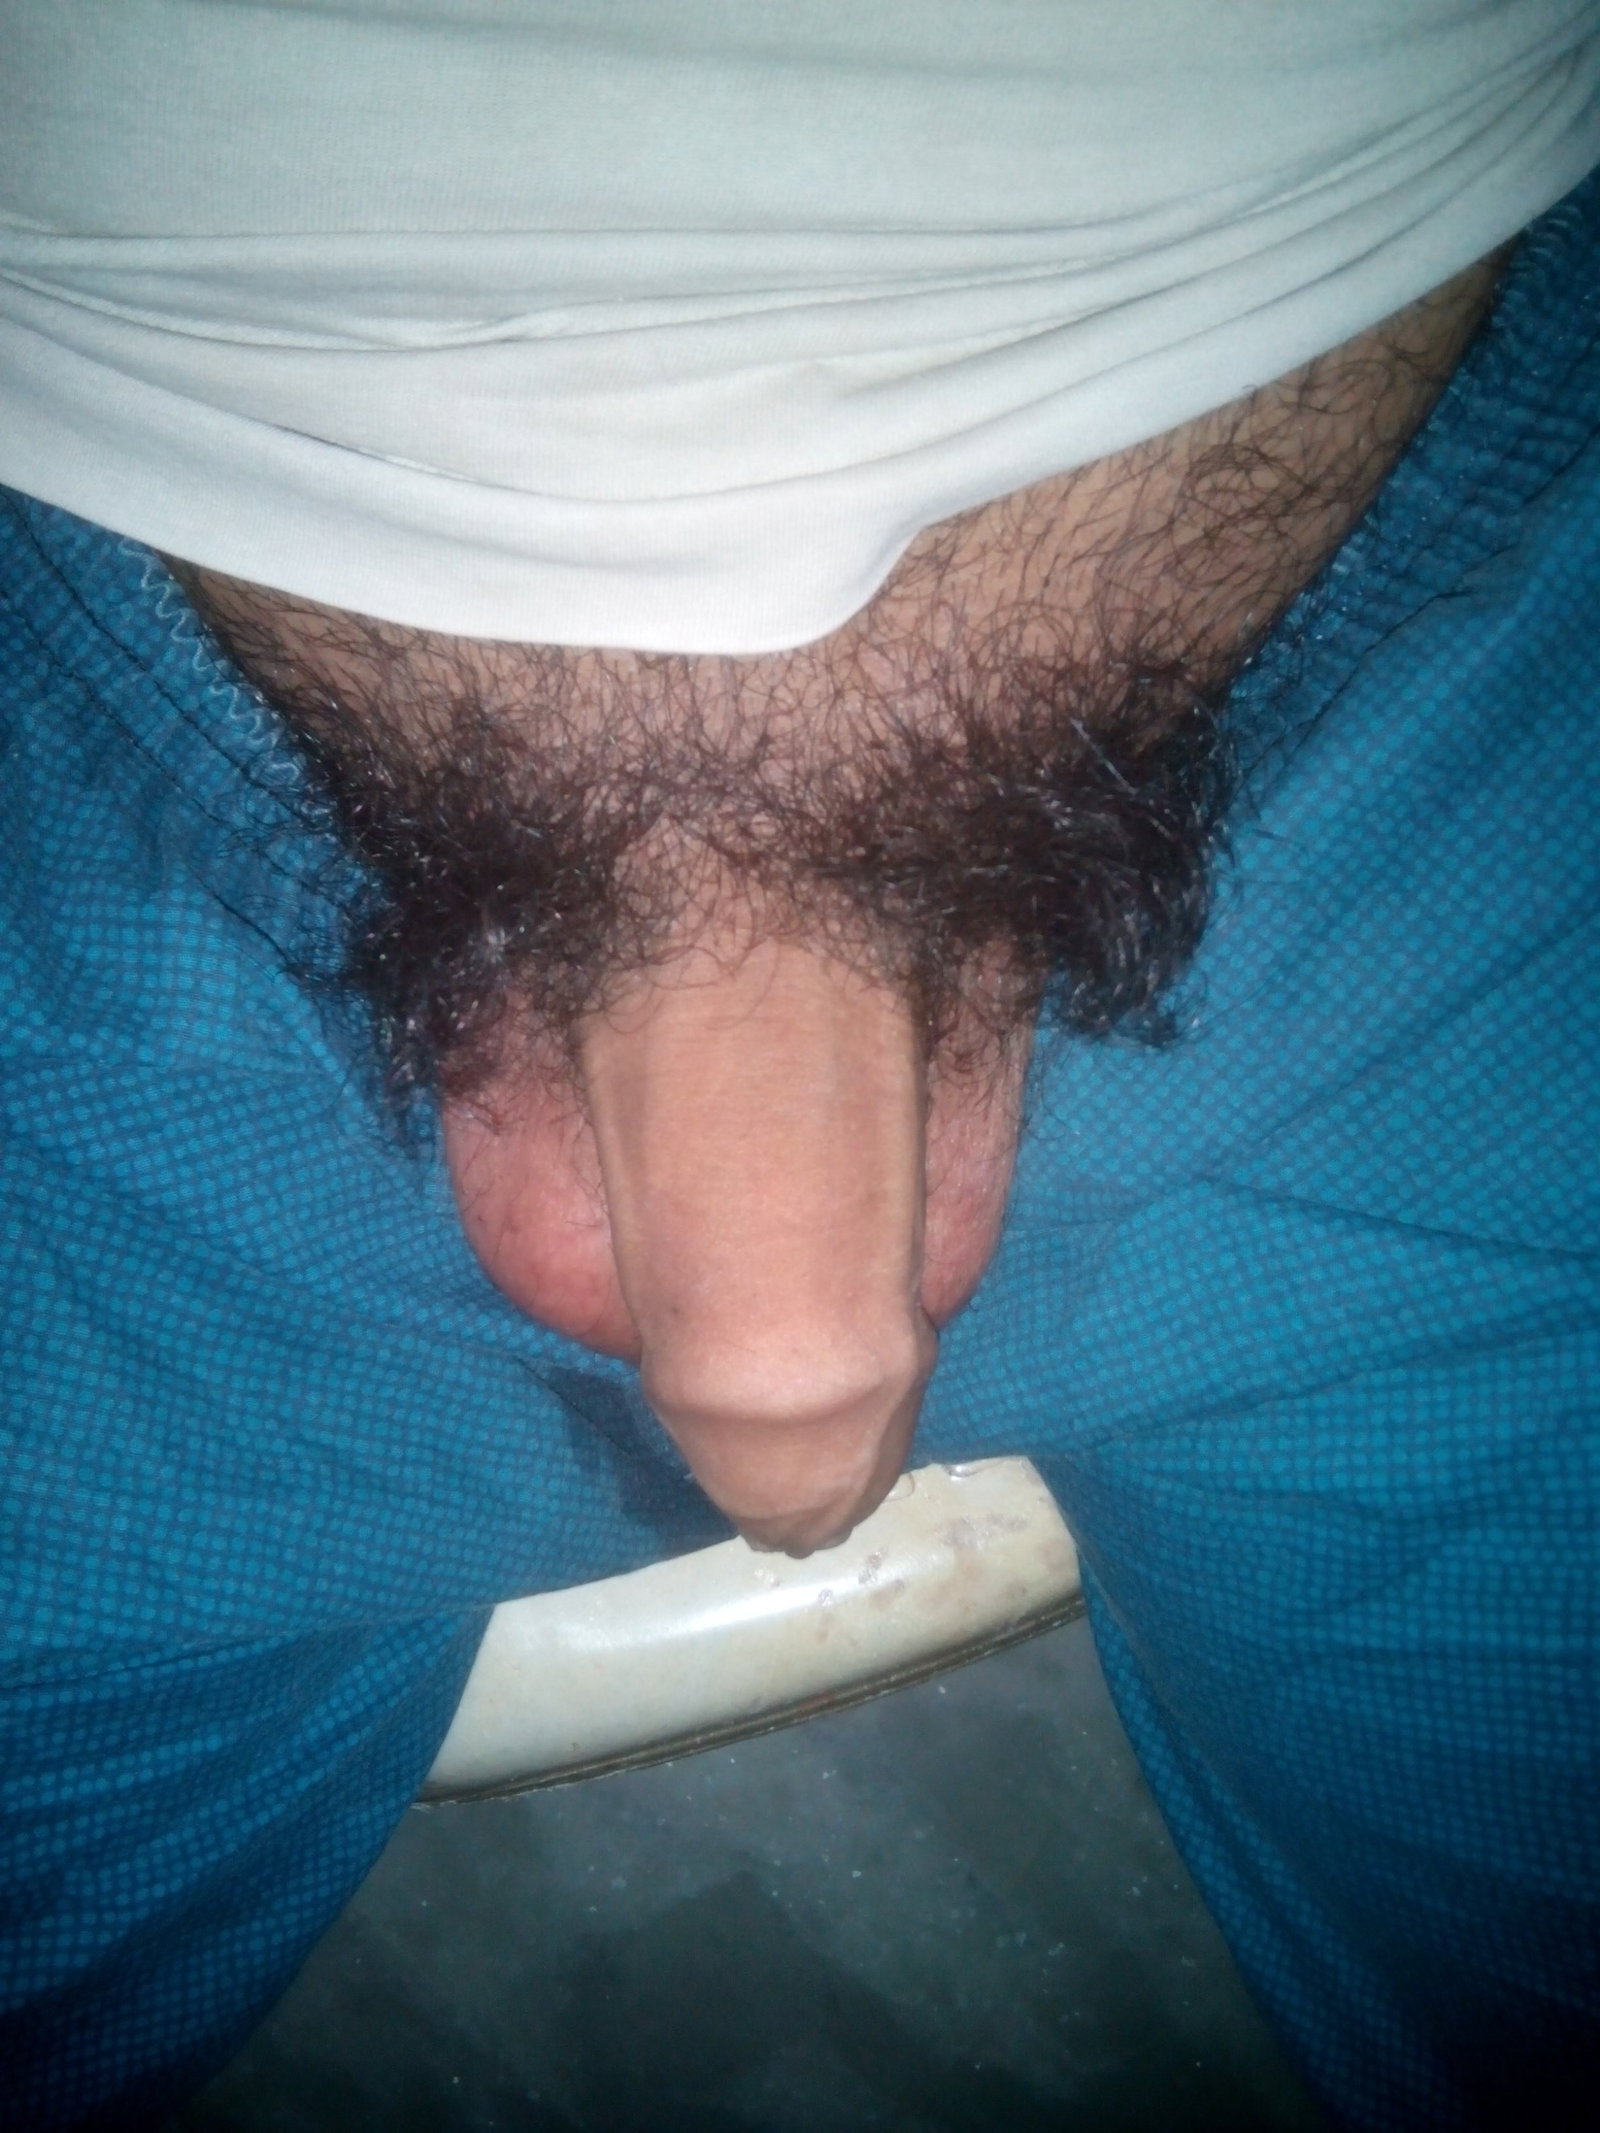 Photo by Pussy Hunter with the username @raj1040, posted on April 10, 2020. The post is about the topic Handjob